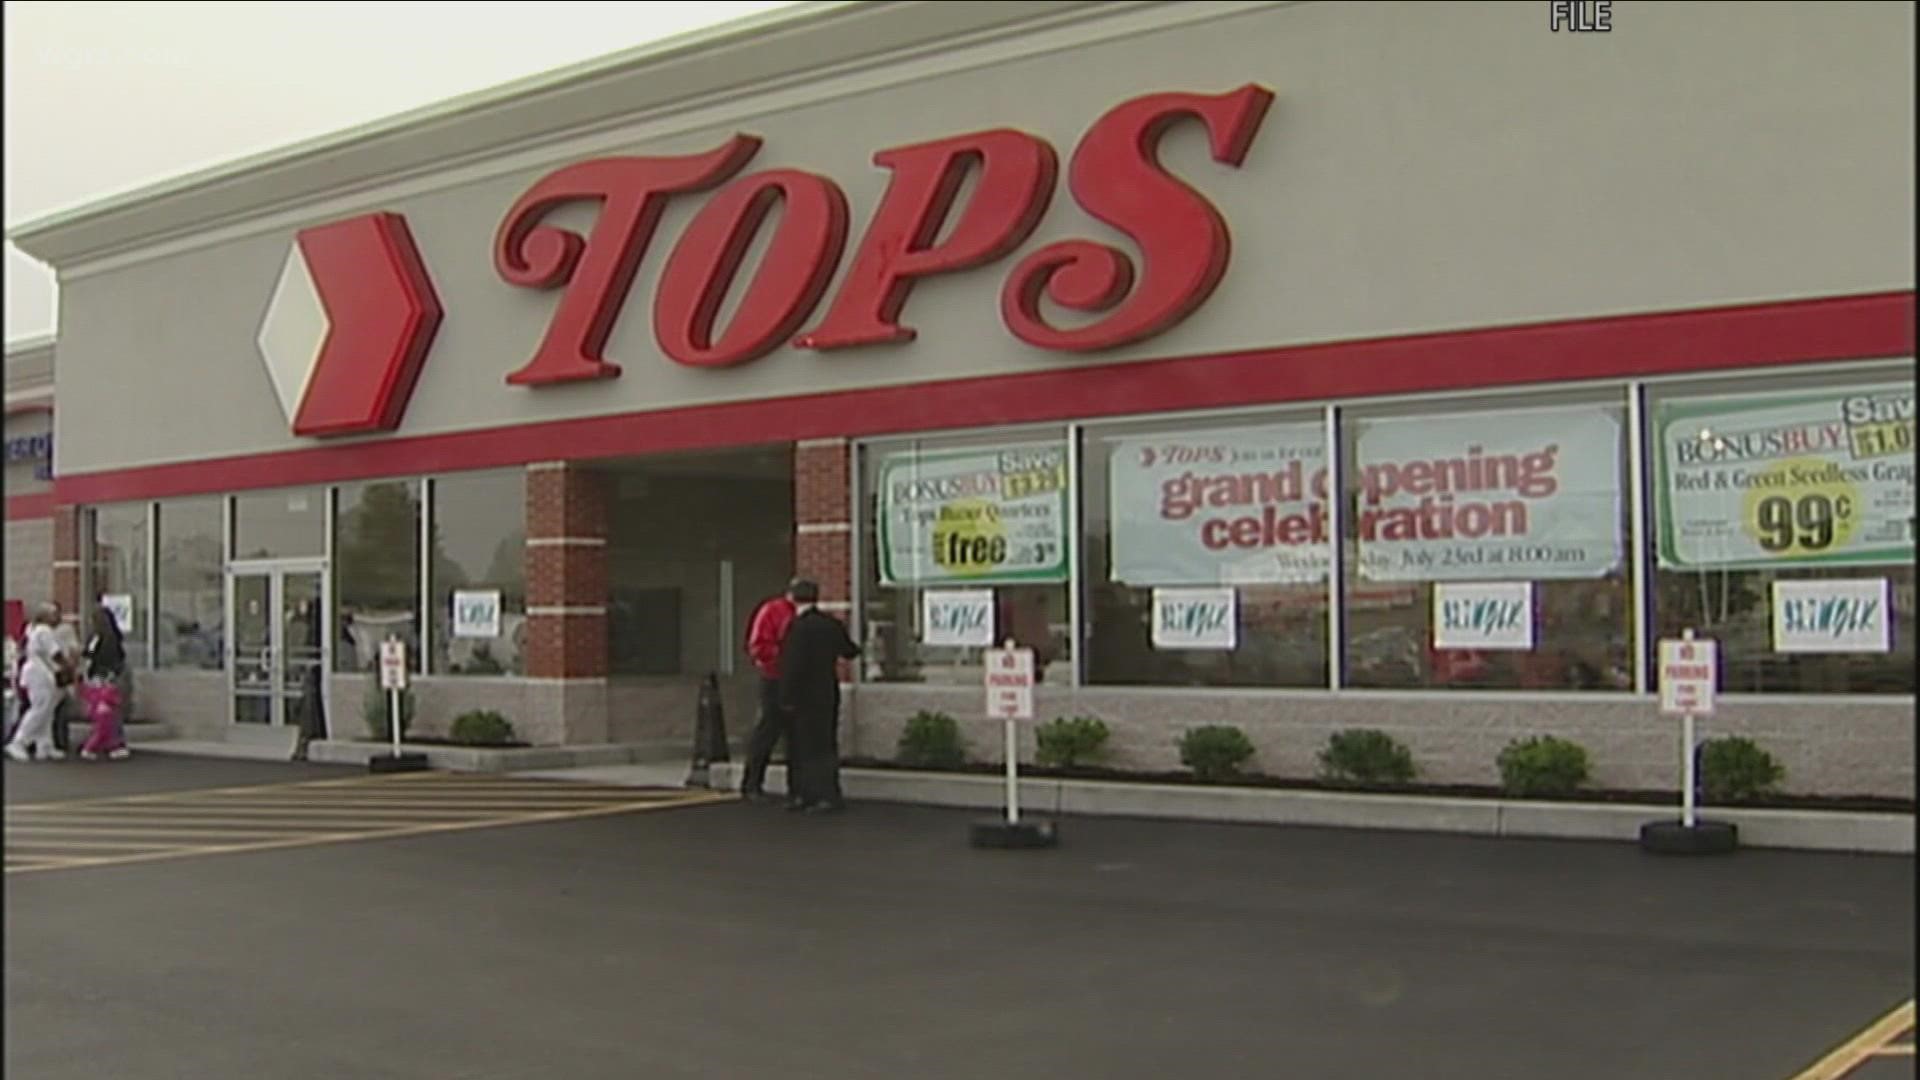 the Tops on Jefferson is a lifeline for people to get groceries,